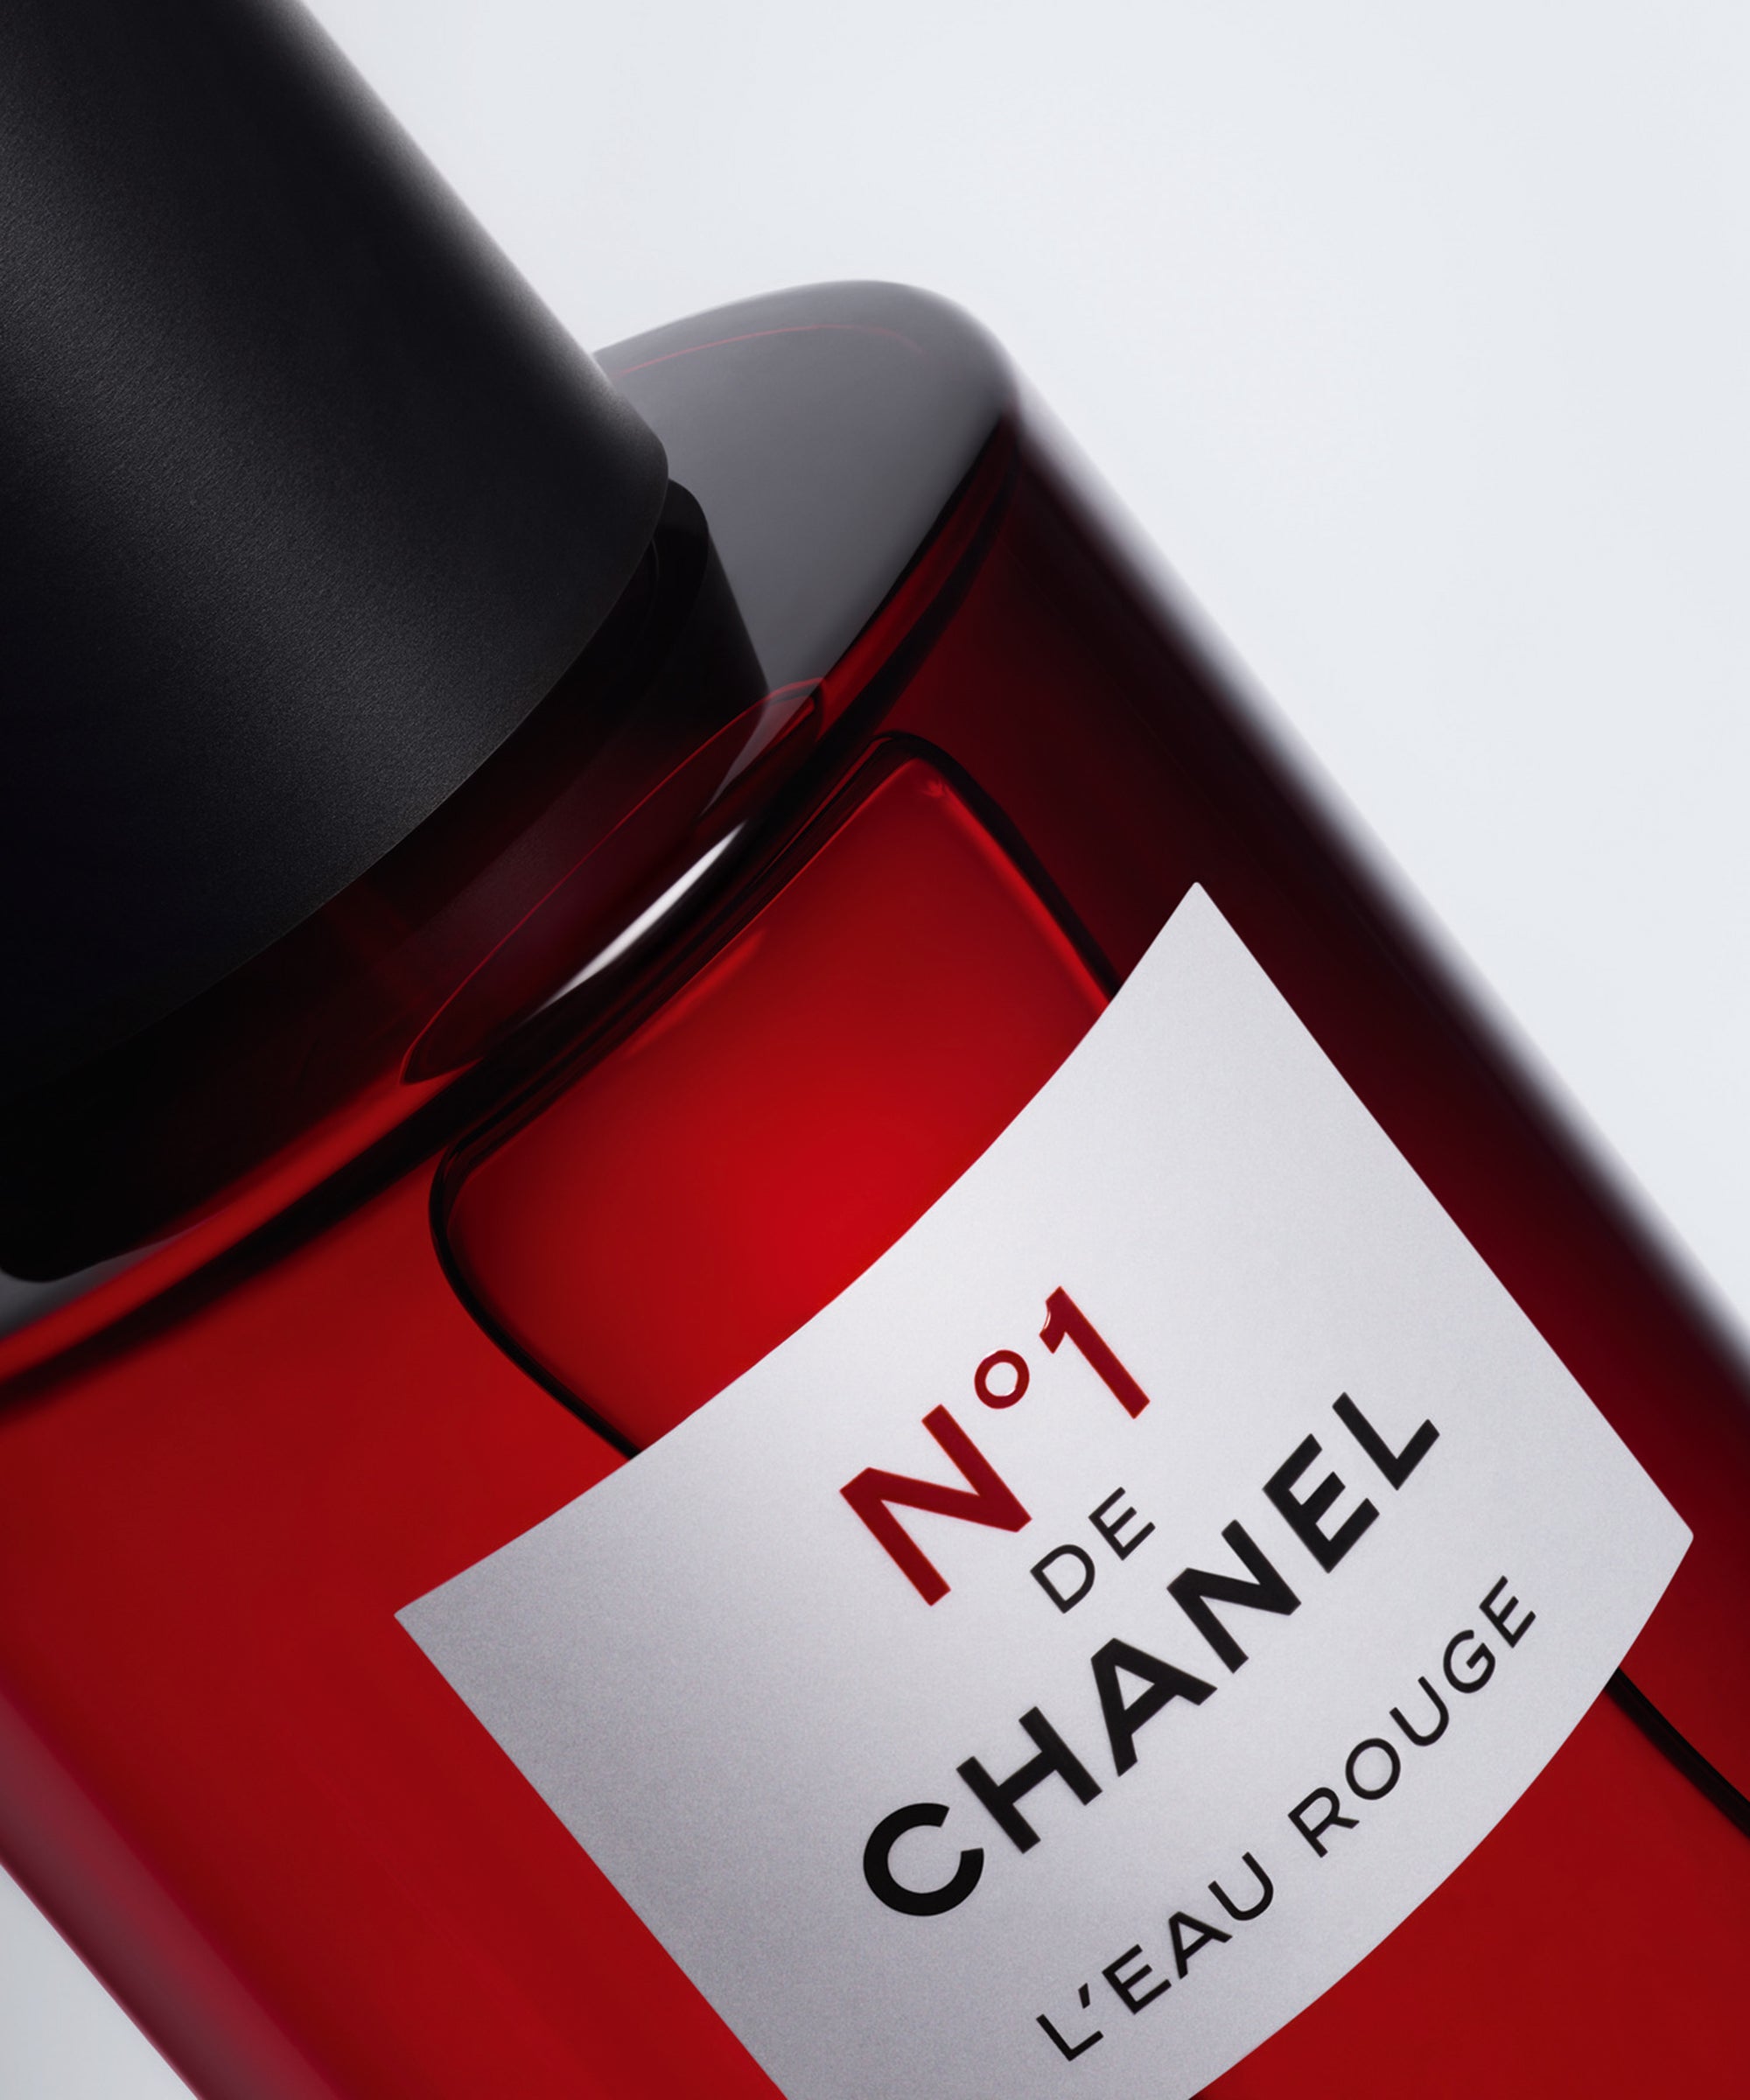 N°1 DE CHANEL – Revitalizing Eco-Friendly Skincare for Body, Face and Soul  - Her Etiquette